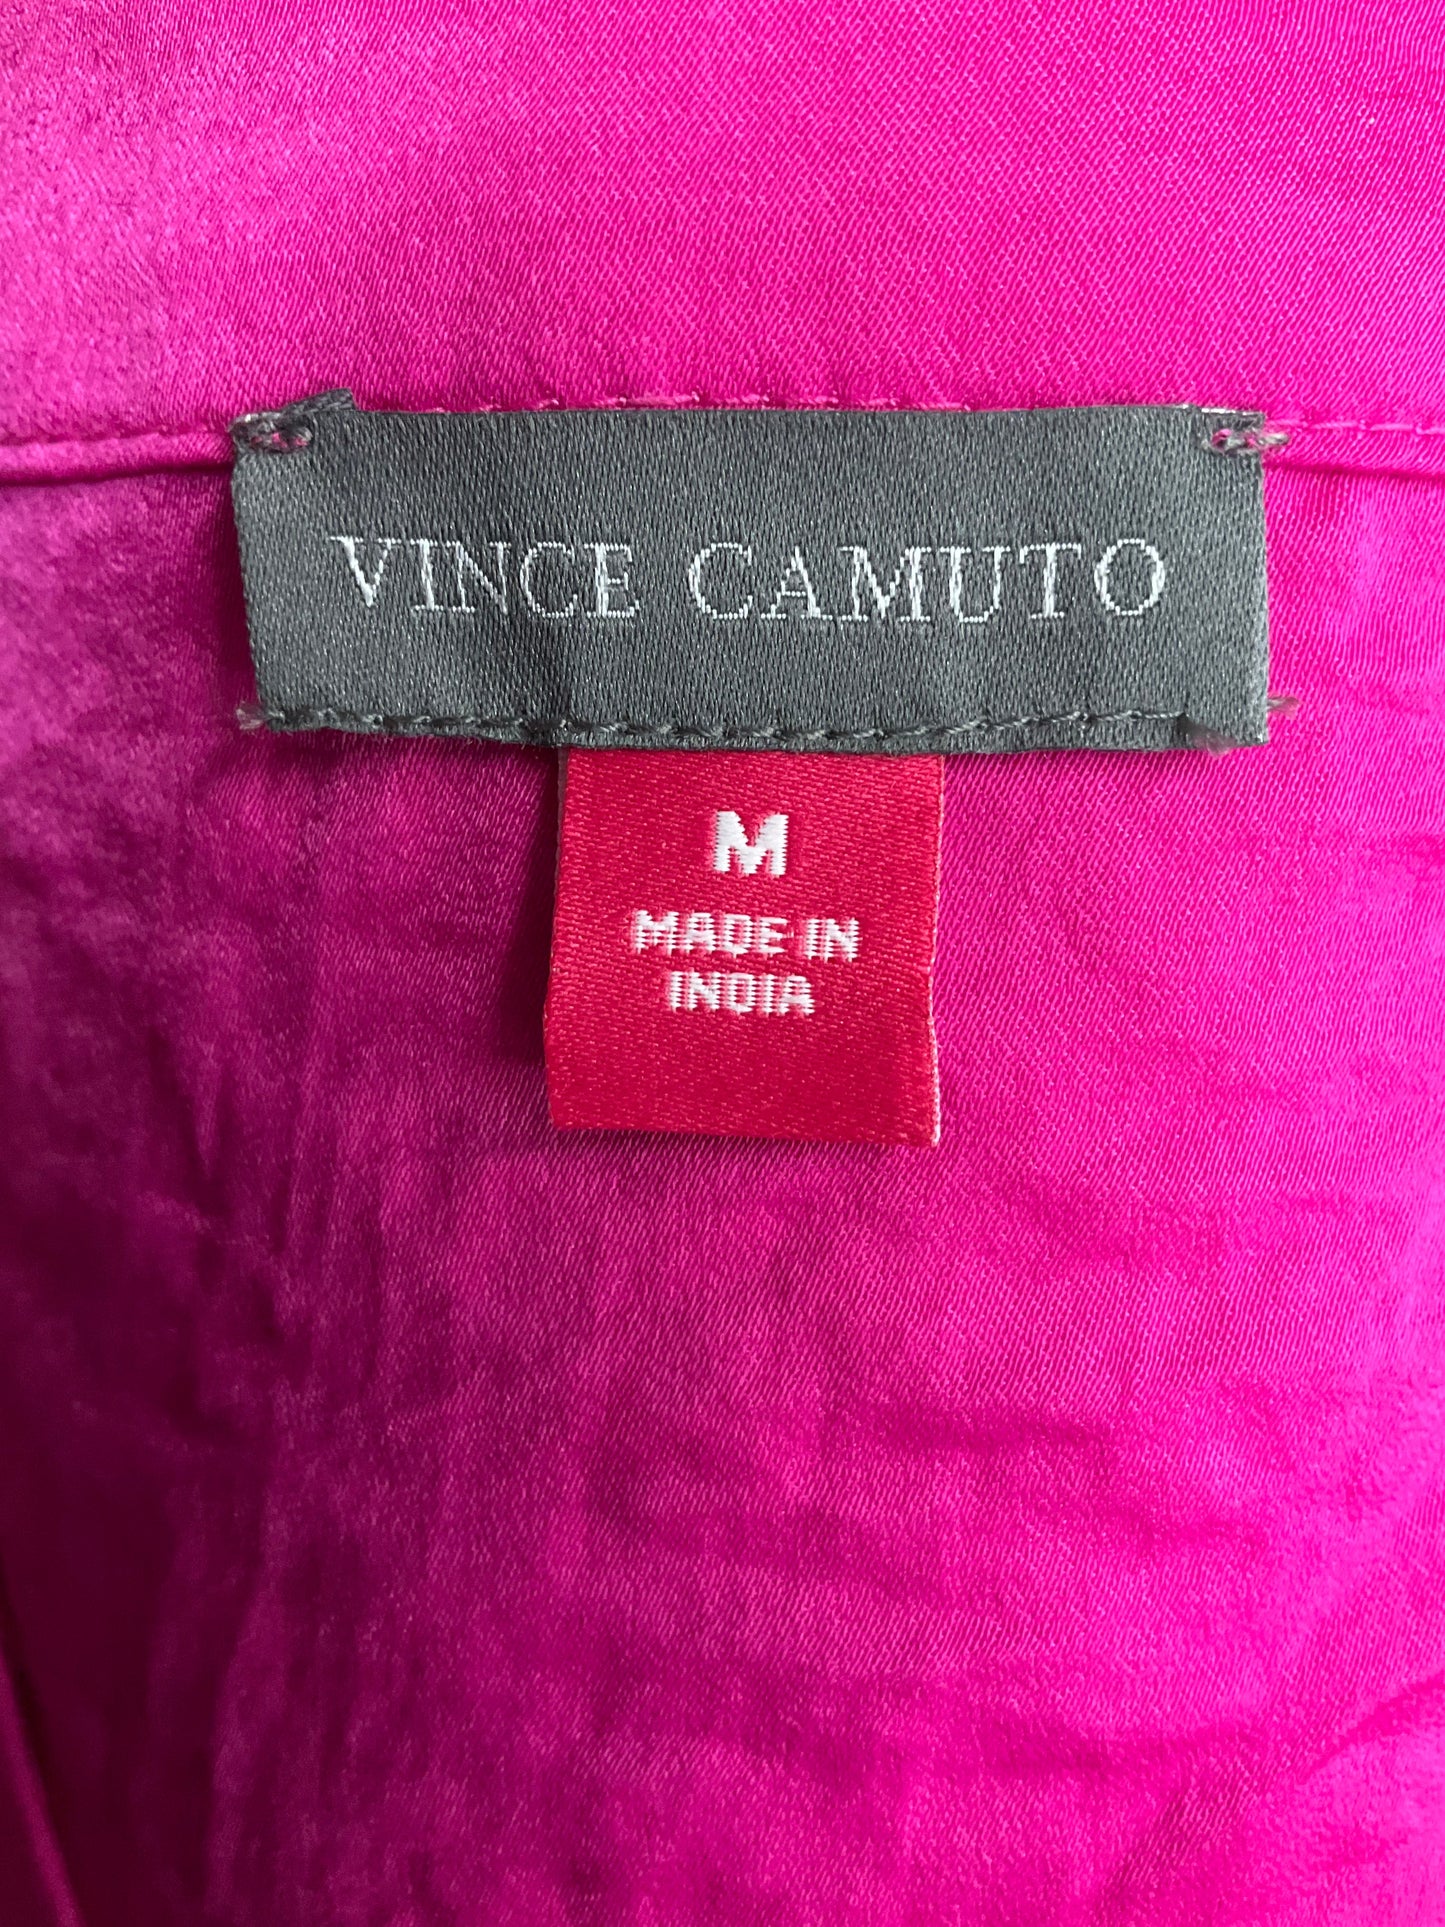 Pink Top Sleeveless Vince Camuto, Size M